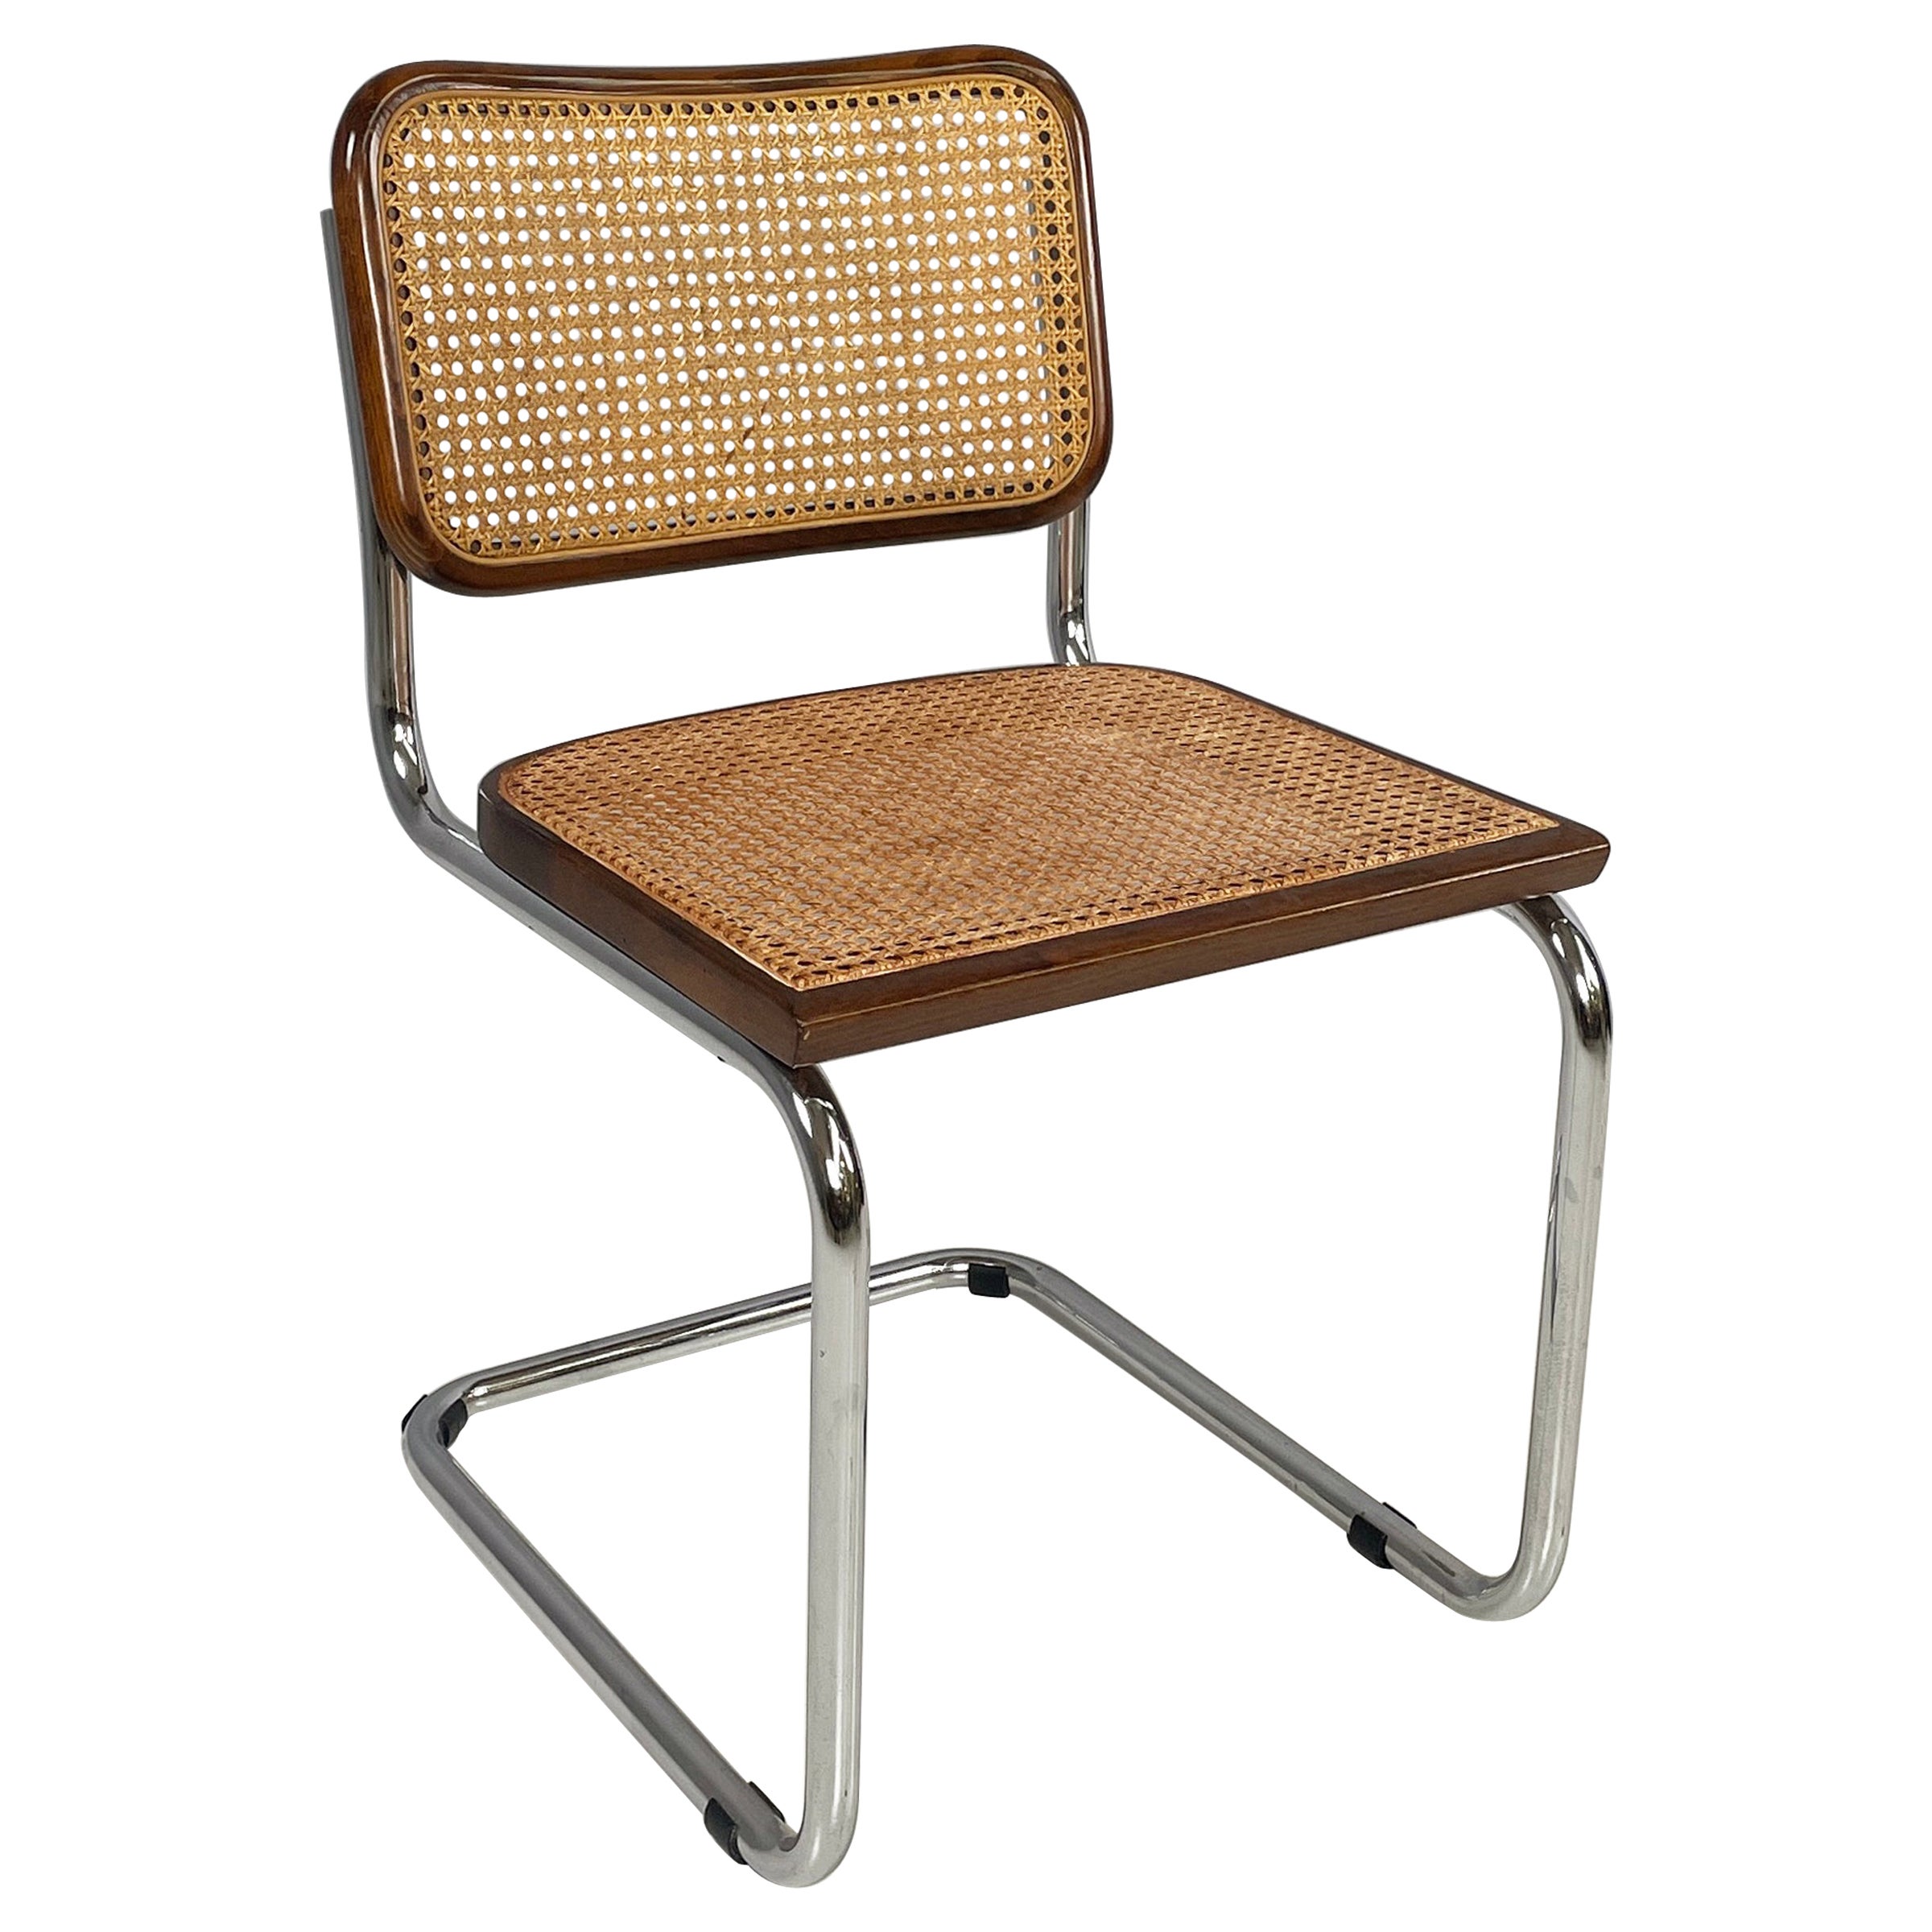 Italian mid-century modern Chair in straw, wood and steel, 1960s